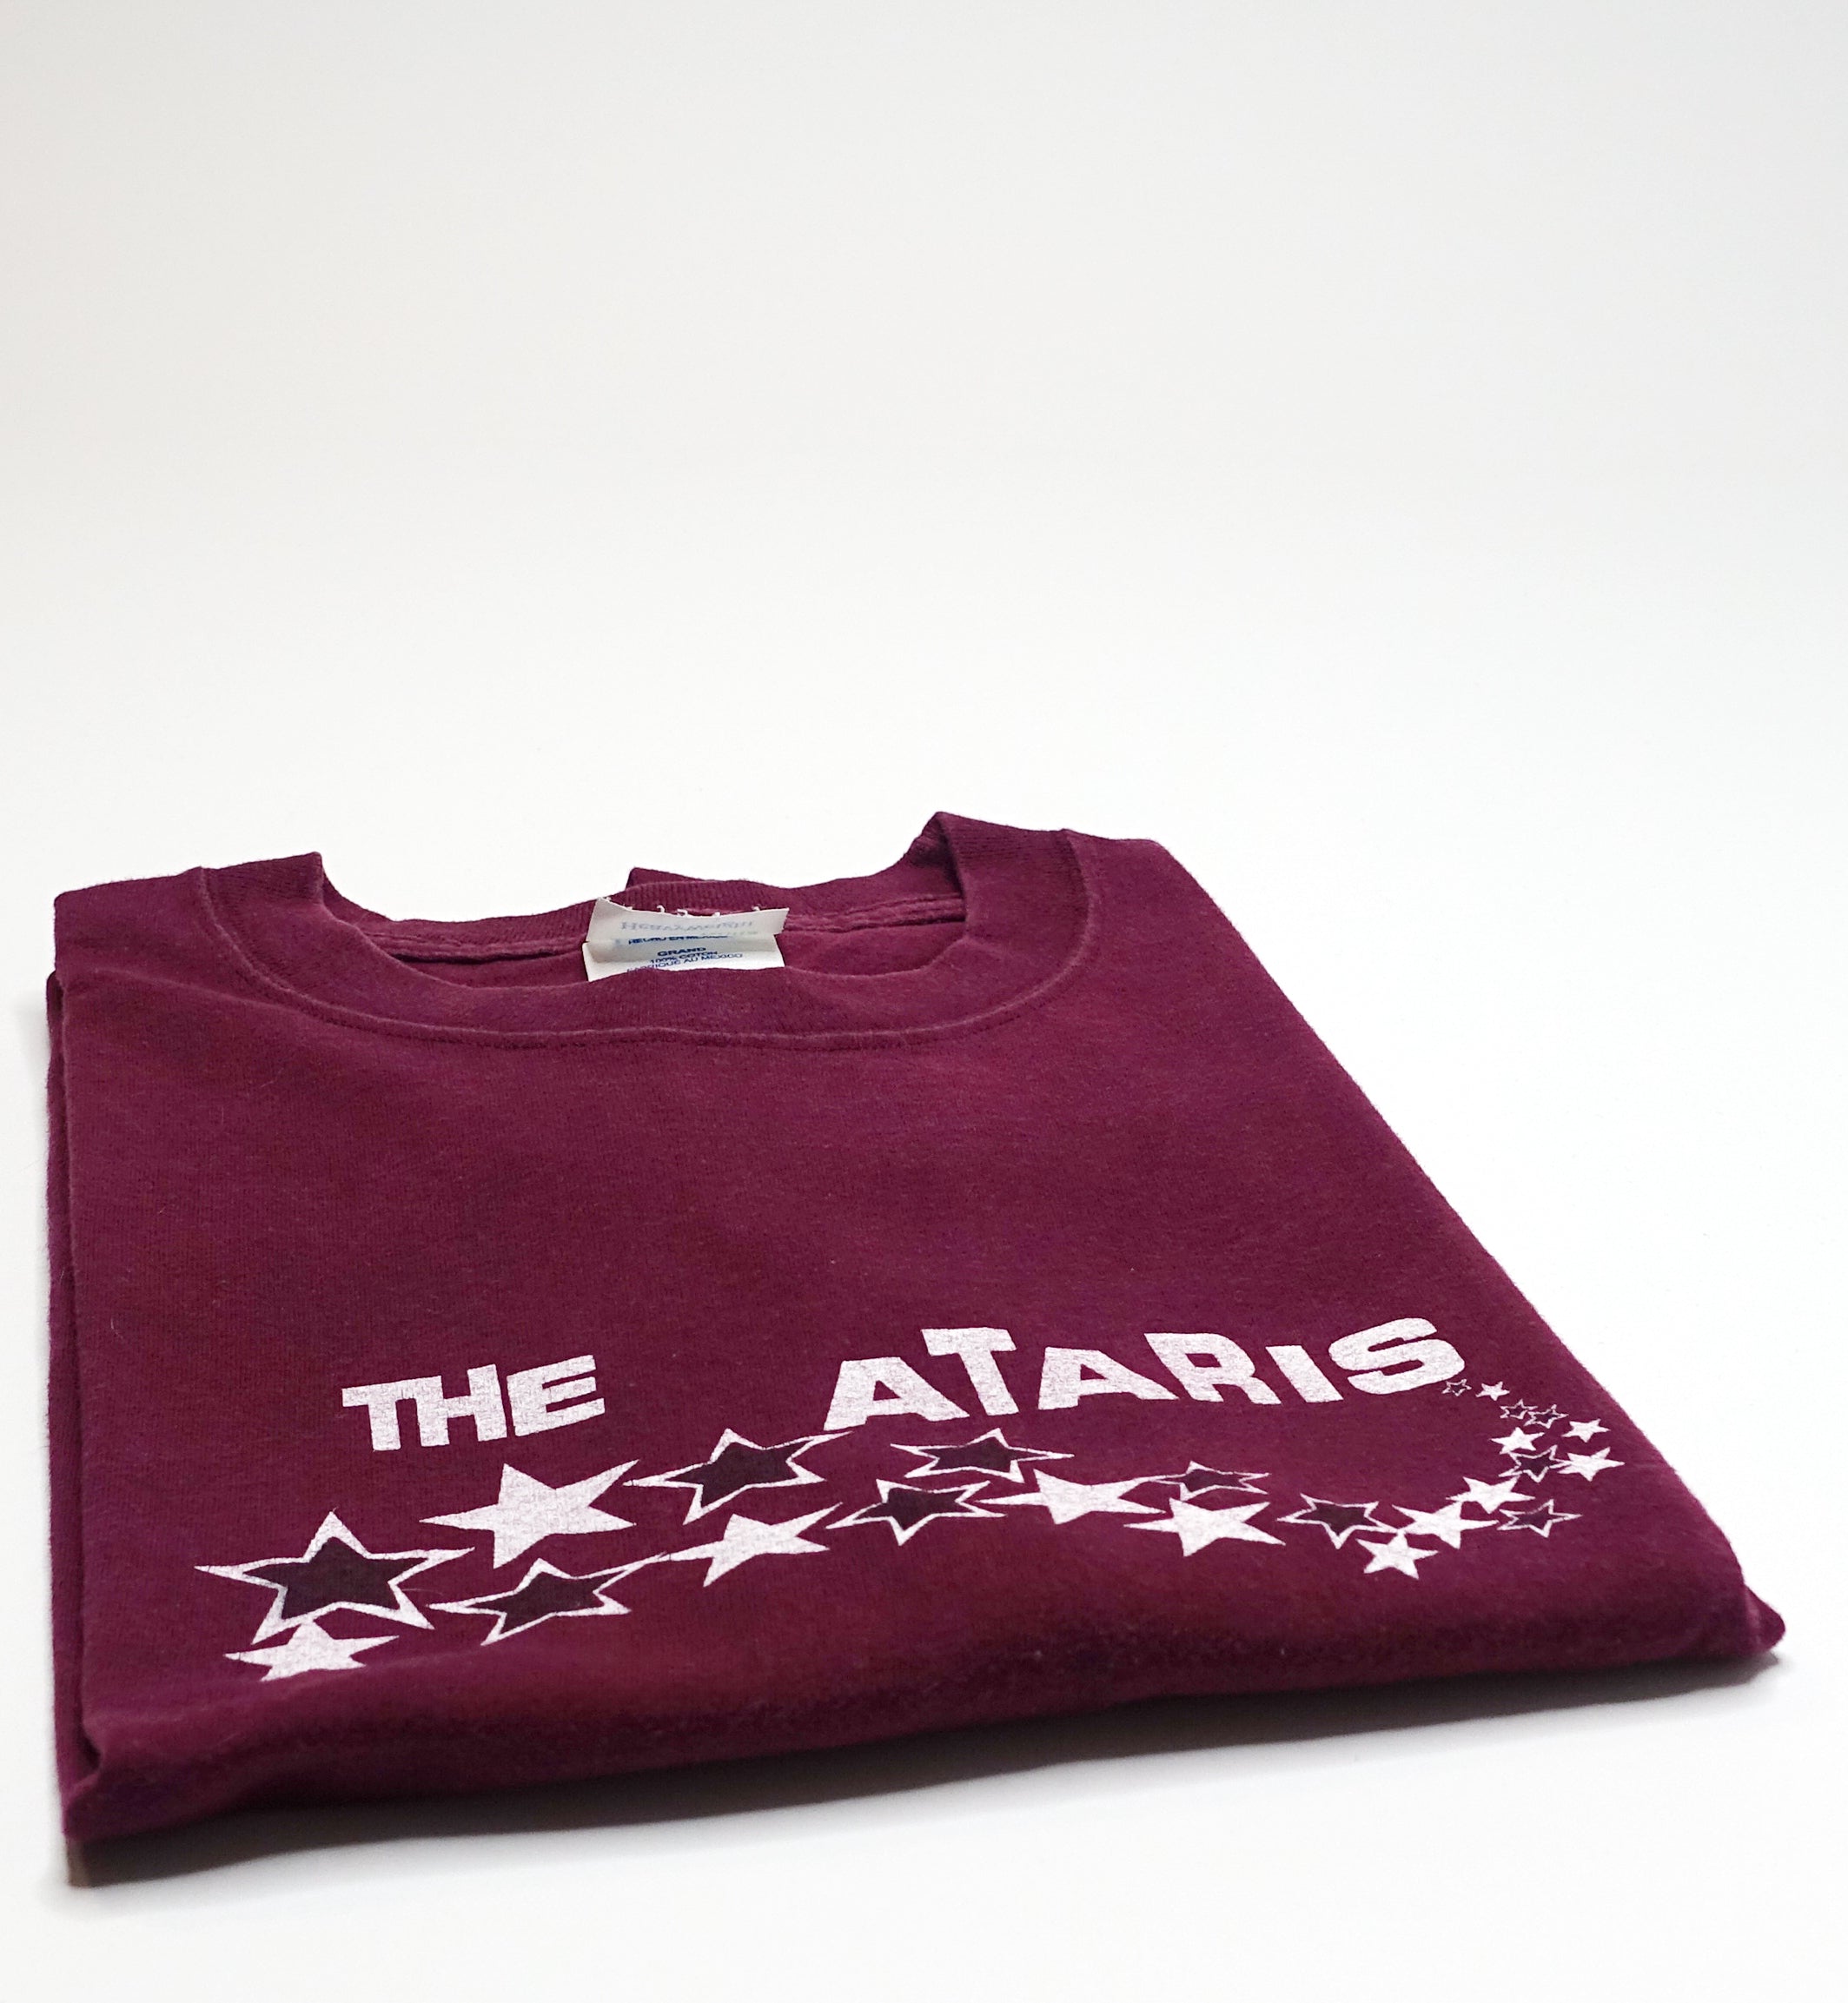 the Ataris - You're Better Off Without Me 1999 Tour Shirt Maroon Size Large